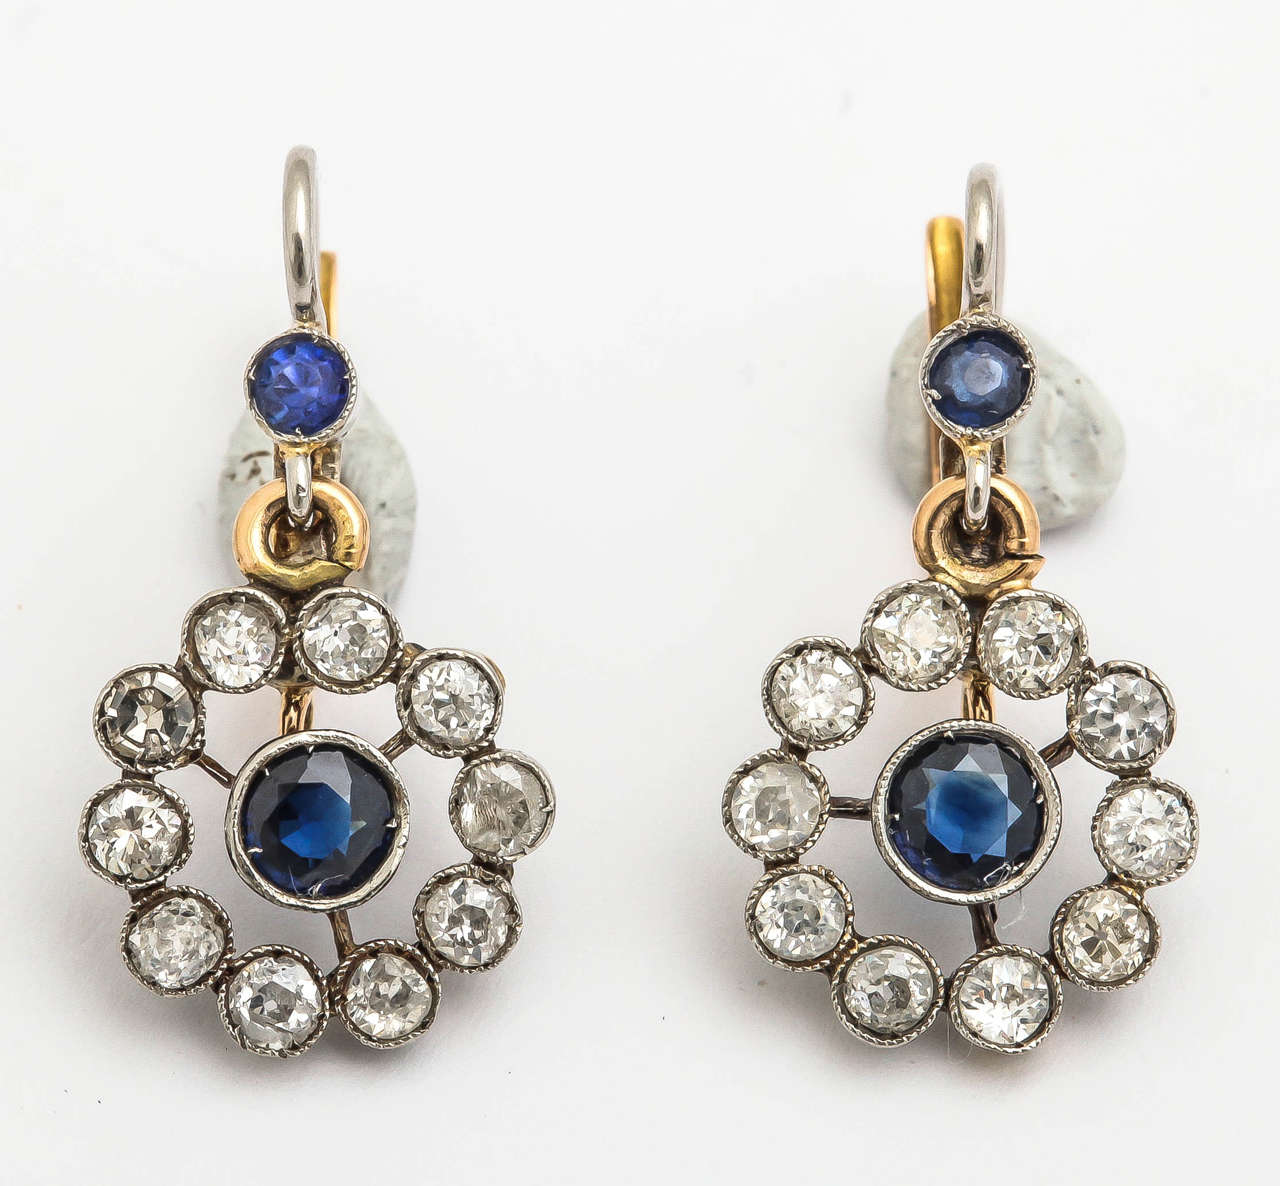 Platinum 18 KT Delicate Gold Floral Earrings Consisting of 20 Old Mine Cut Diamonds Weighing Approximately 1.1 Carat and Further Embellished with 4 Faceted Blue Sapphires Weighing Approximately .75 Carat
Designed with Beautiful French Lever